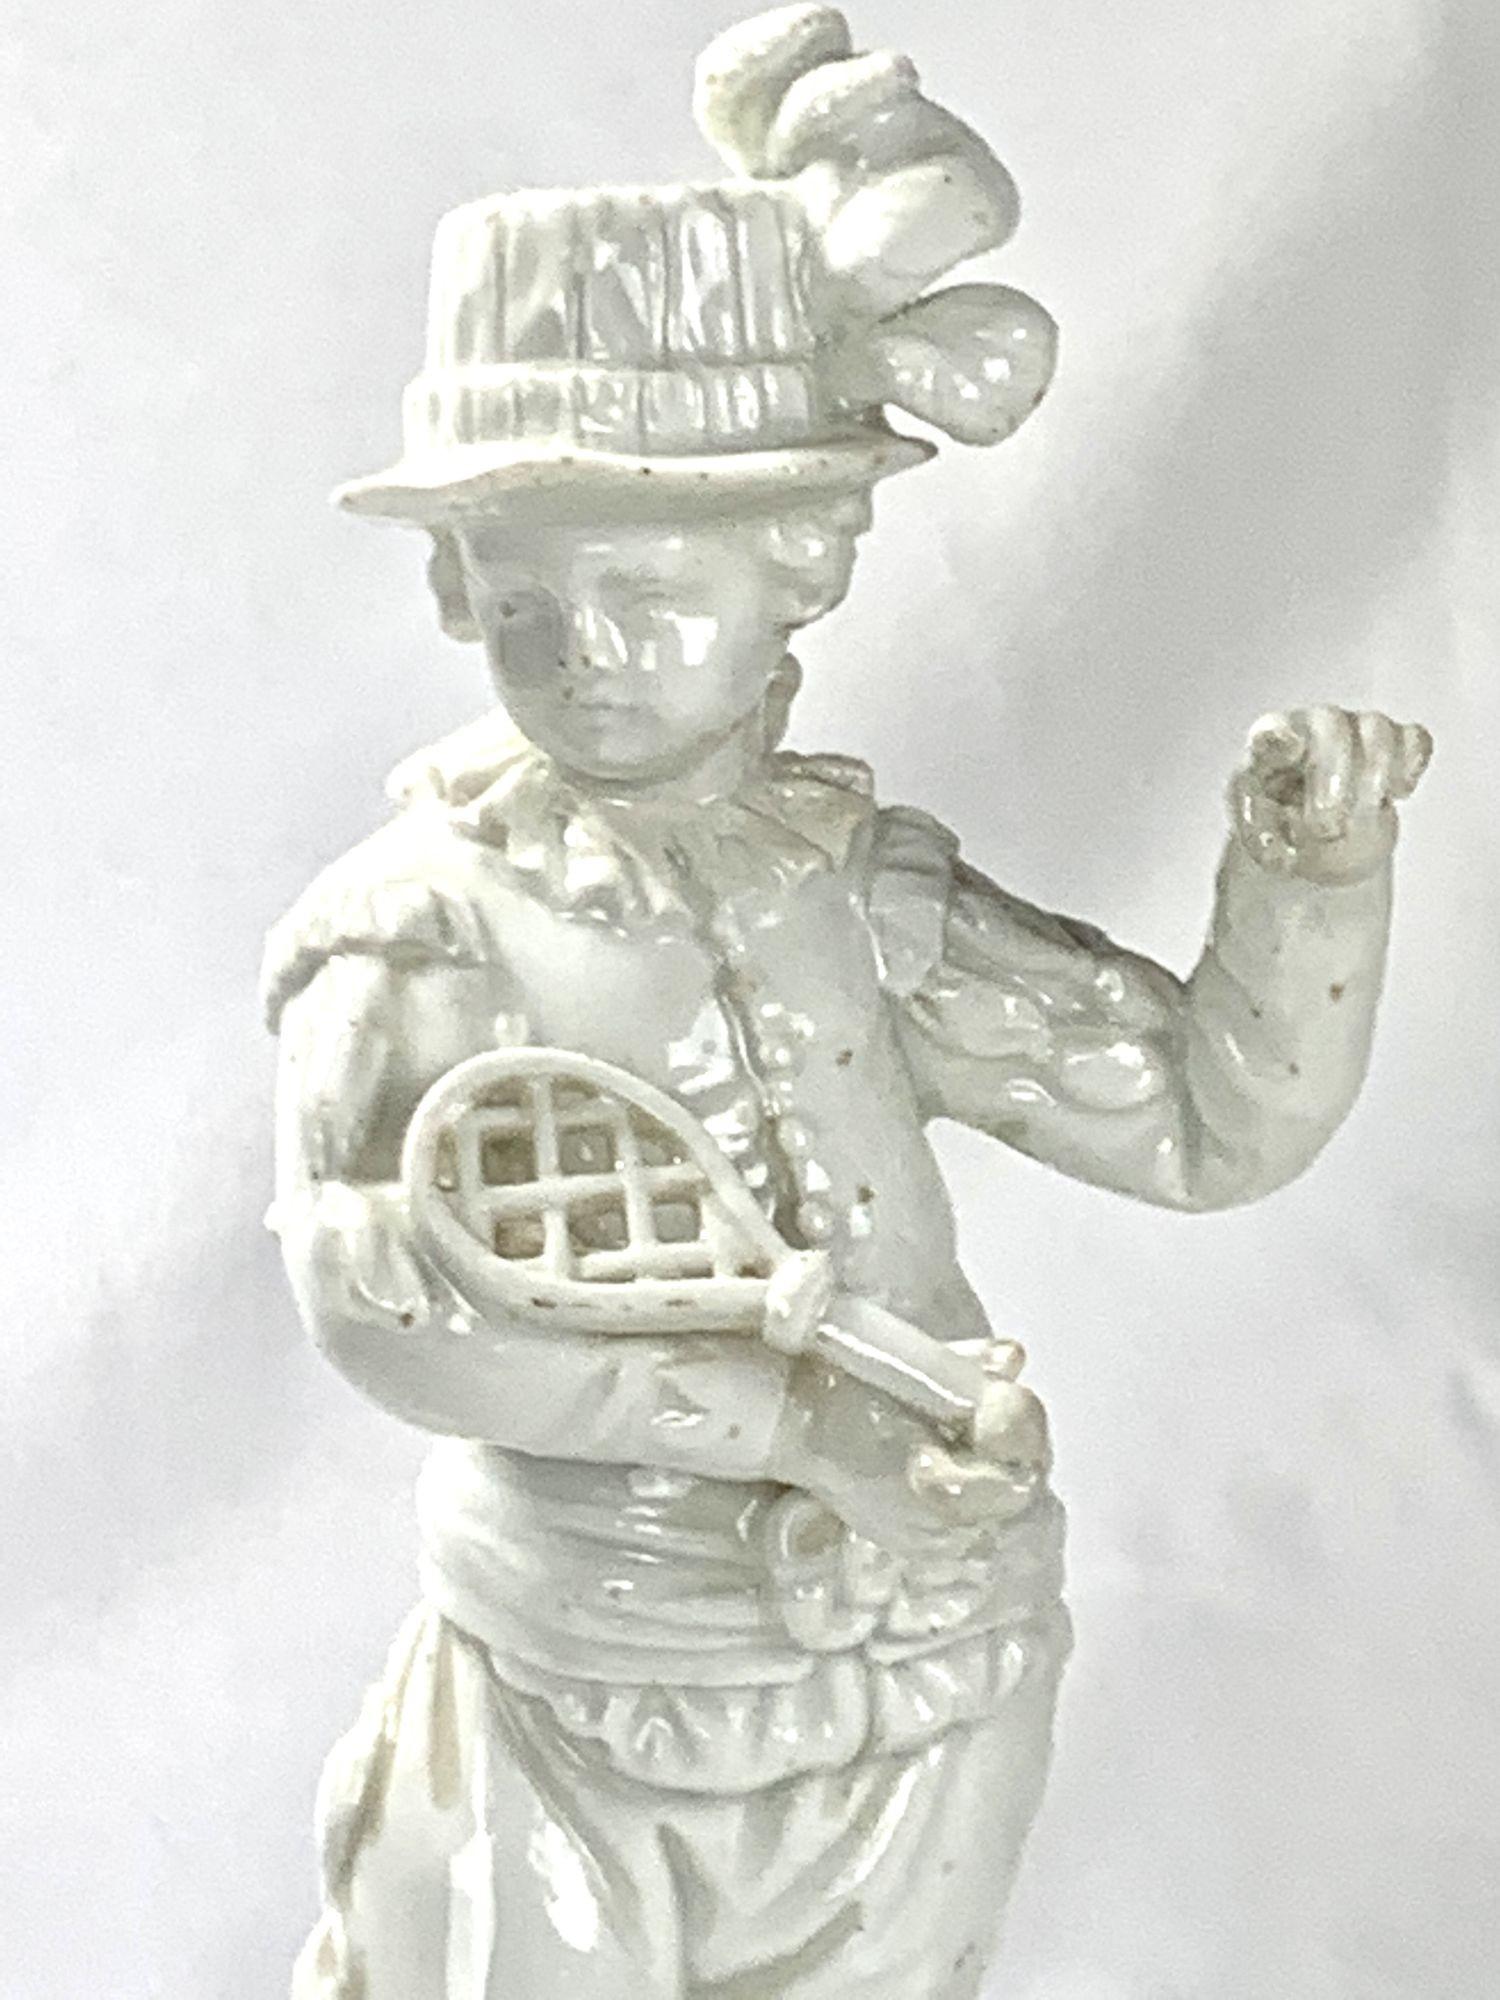 This figure of an elegant young nobleman ready to play Real Tennis was made of German (Saxony) hard-paste porcelain circa 1820.
Real Tennis, a favorite pastime of King Henry The Eighth of England, is also known as the Sport of Kings*
The young man